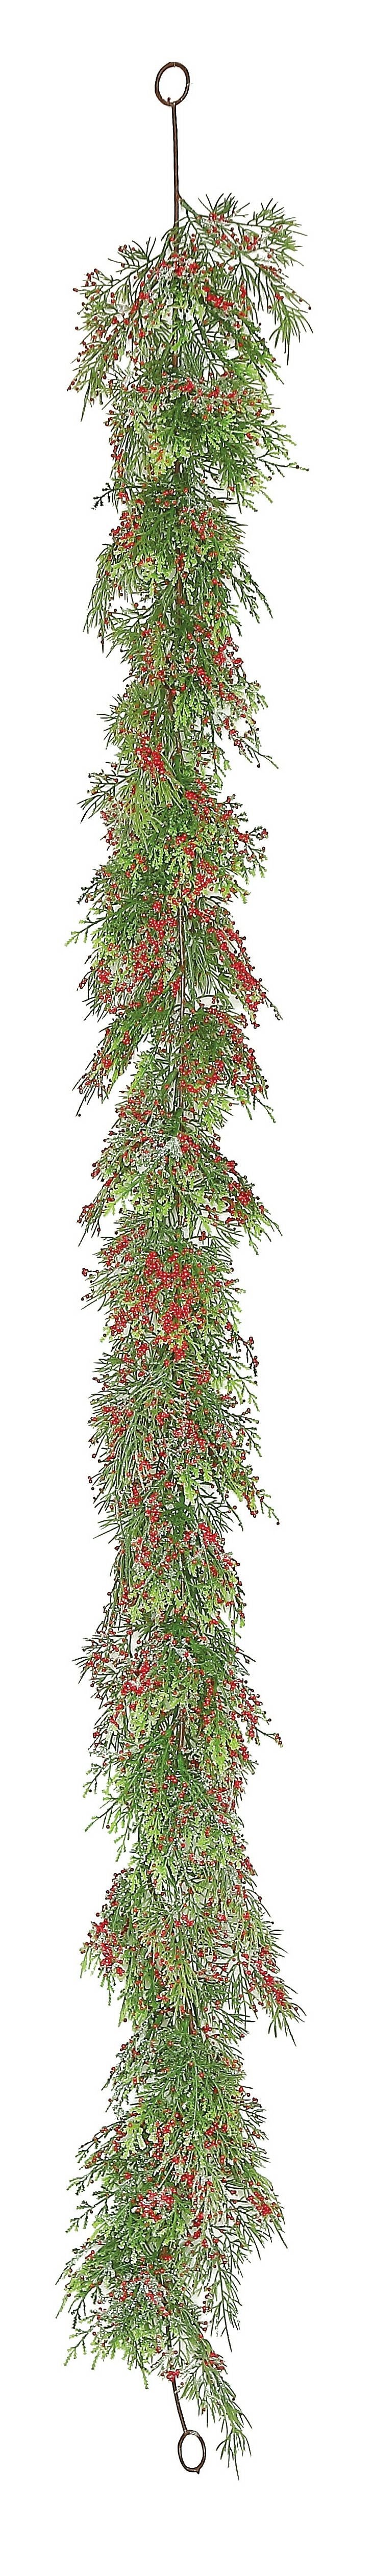 JCP2182-GR CYPRESS GARLAND W/TINY RED BERRIES 6' GREEN/RED